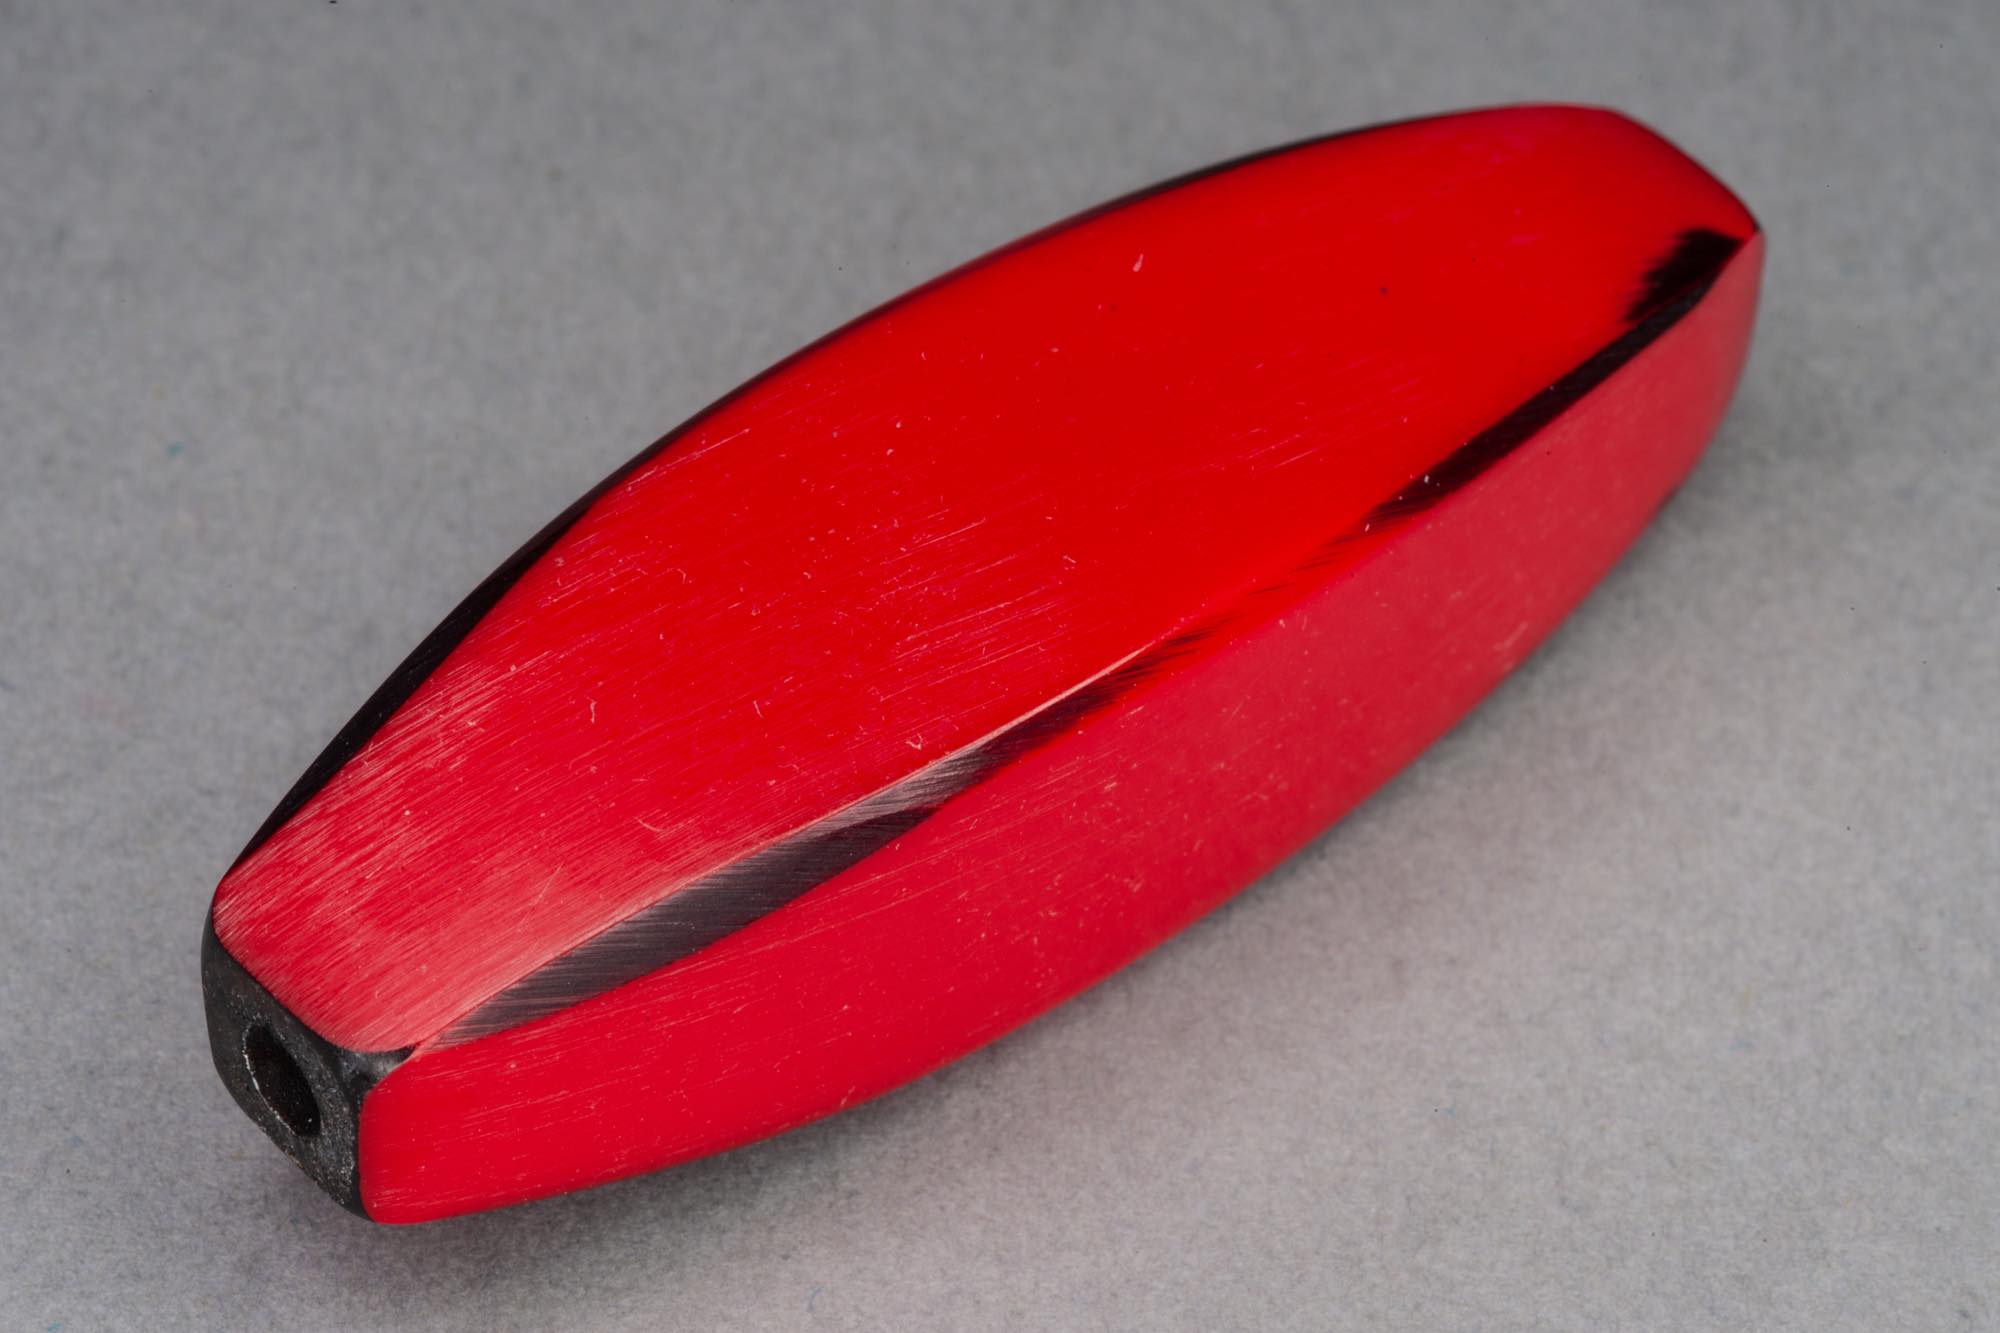 Red ‘Banana’ Resin Bead With Edge Detailing, 45x14mm, 2mm hole